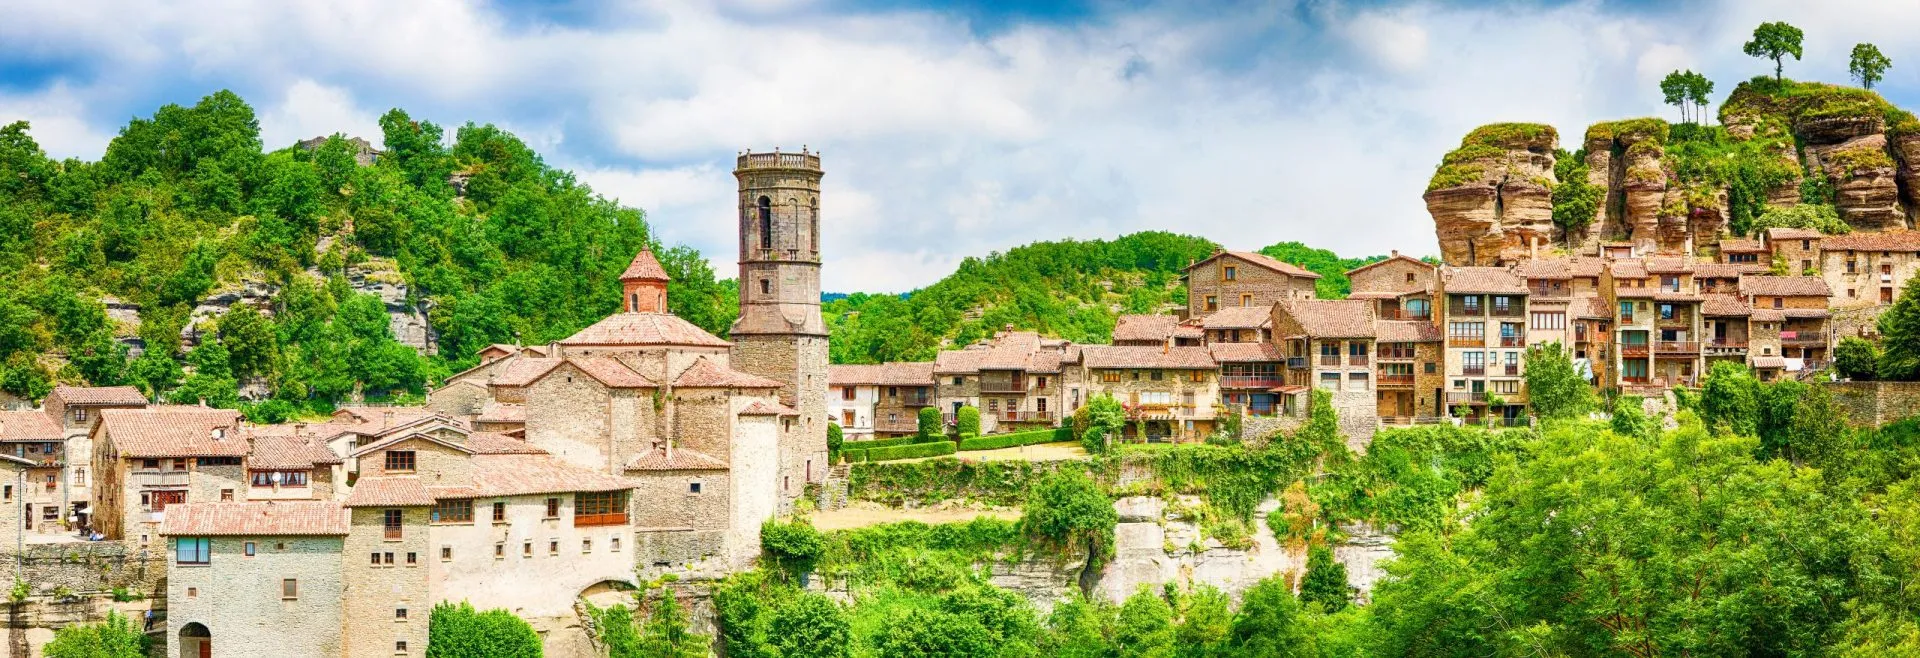 Rupit, a medieval village in the middle of nature. Catalonia, Osona.